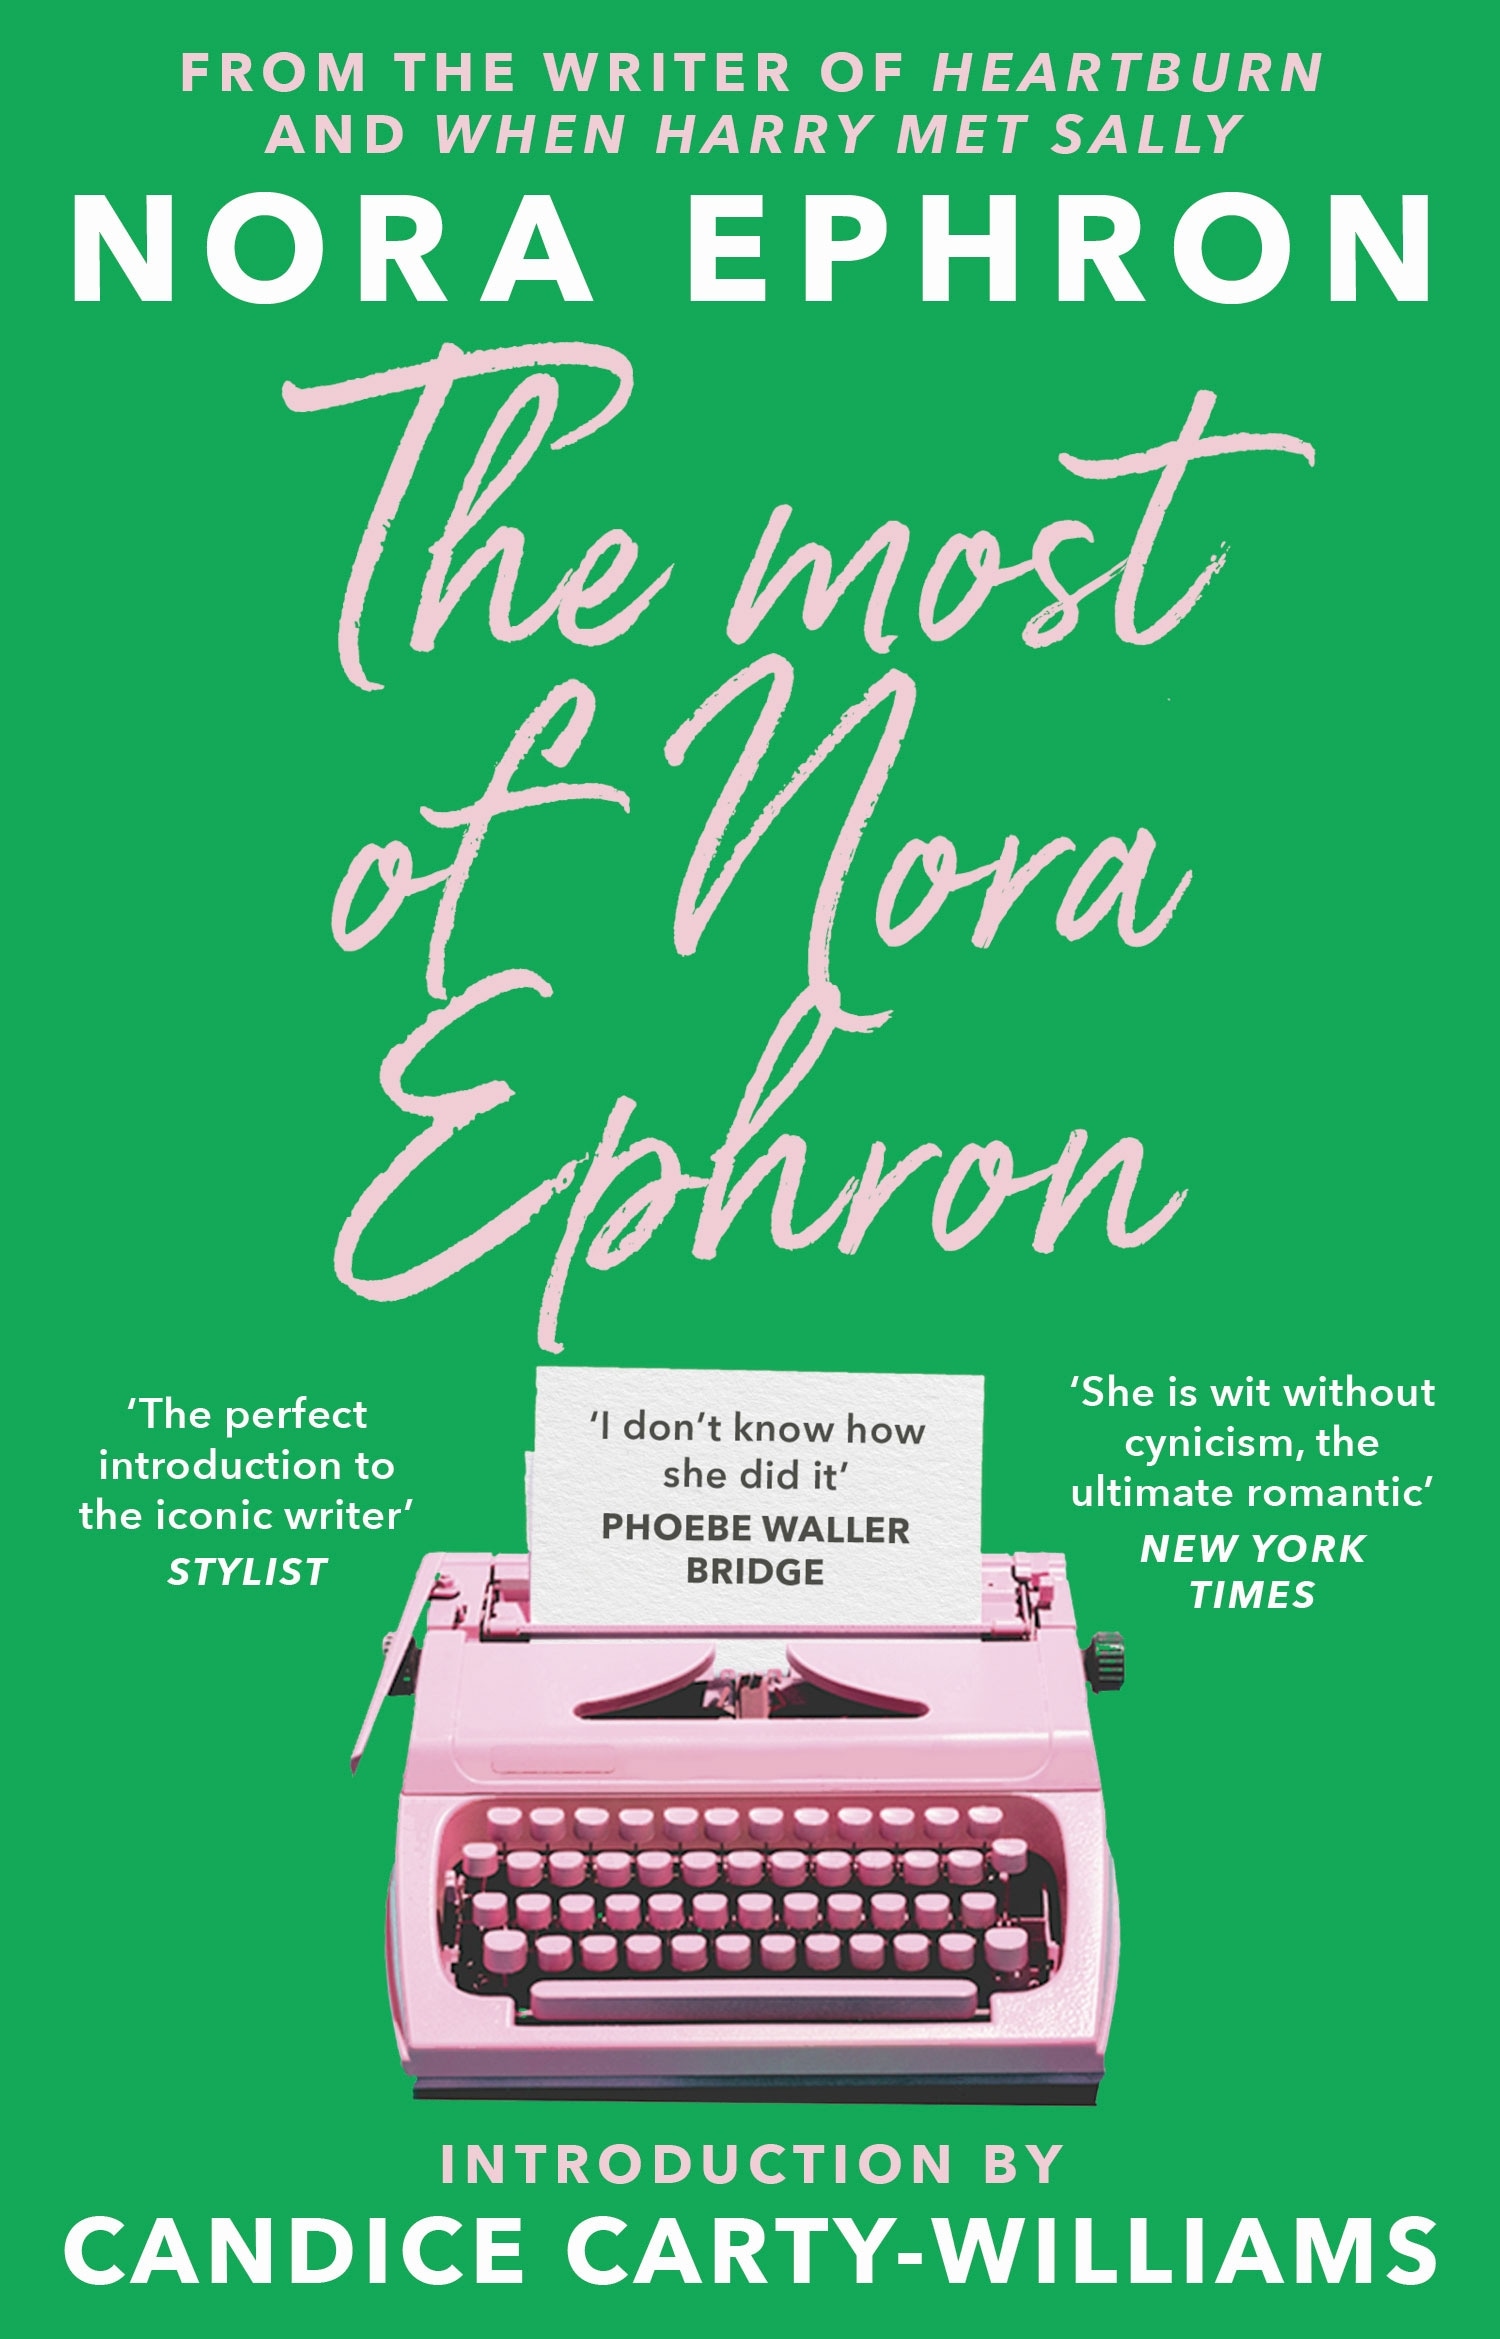 Book “The Most of Nora Ephron” by Nora Ephron, Candice Carty-Williams — October 6, 2022